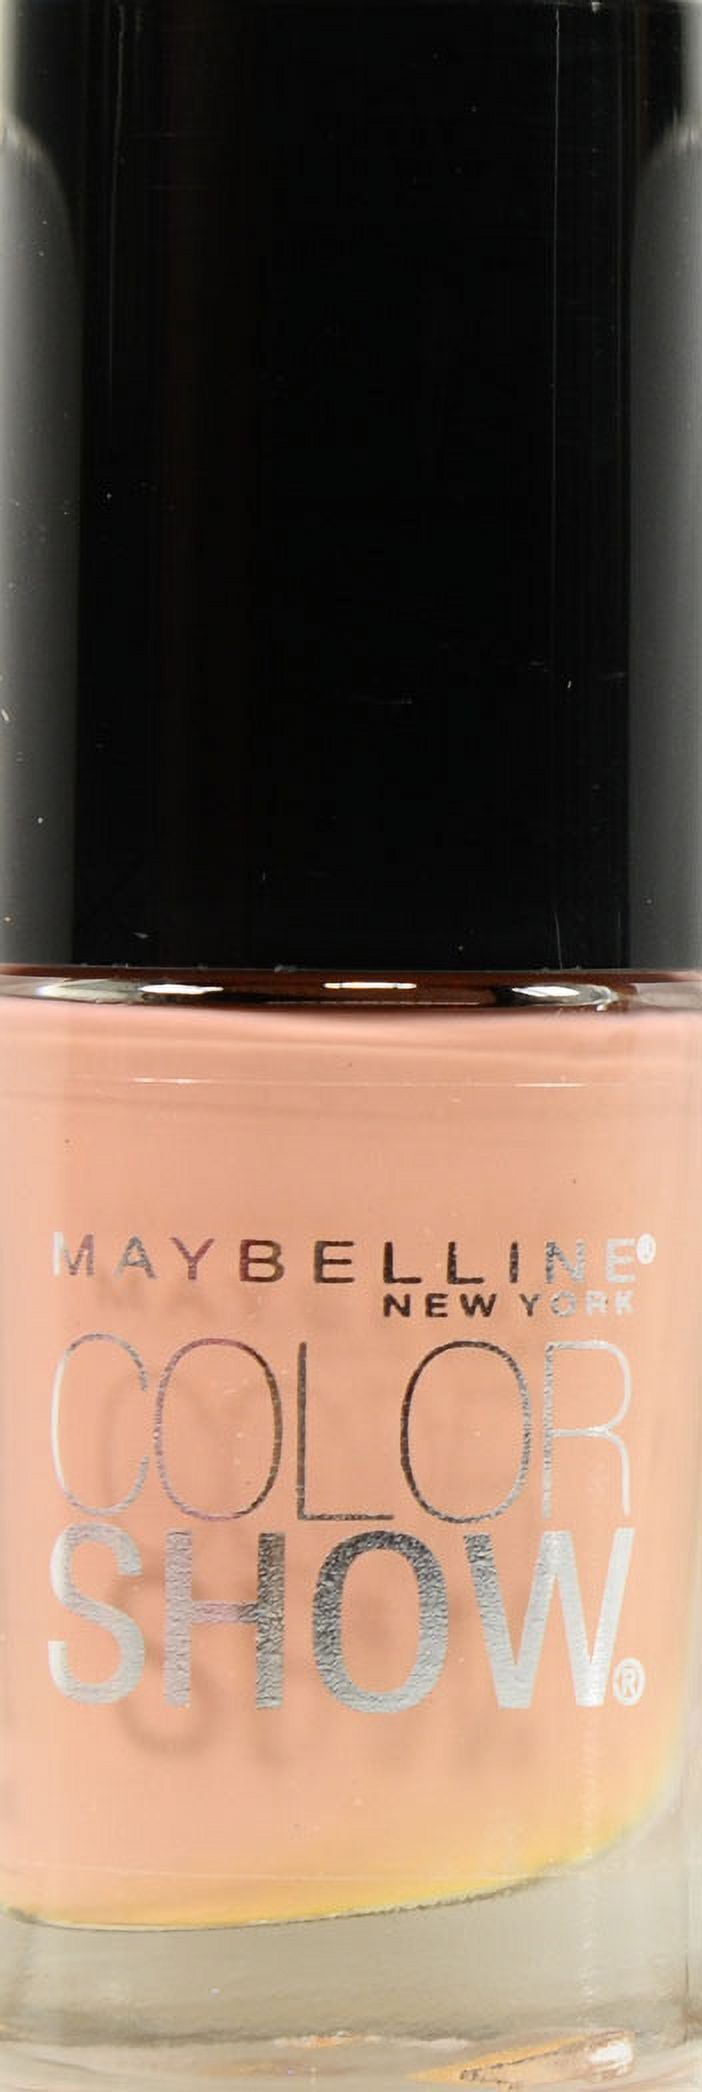 Maybelline Colour Show Nail Varnish